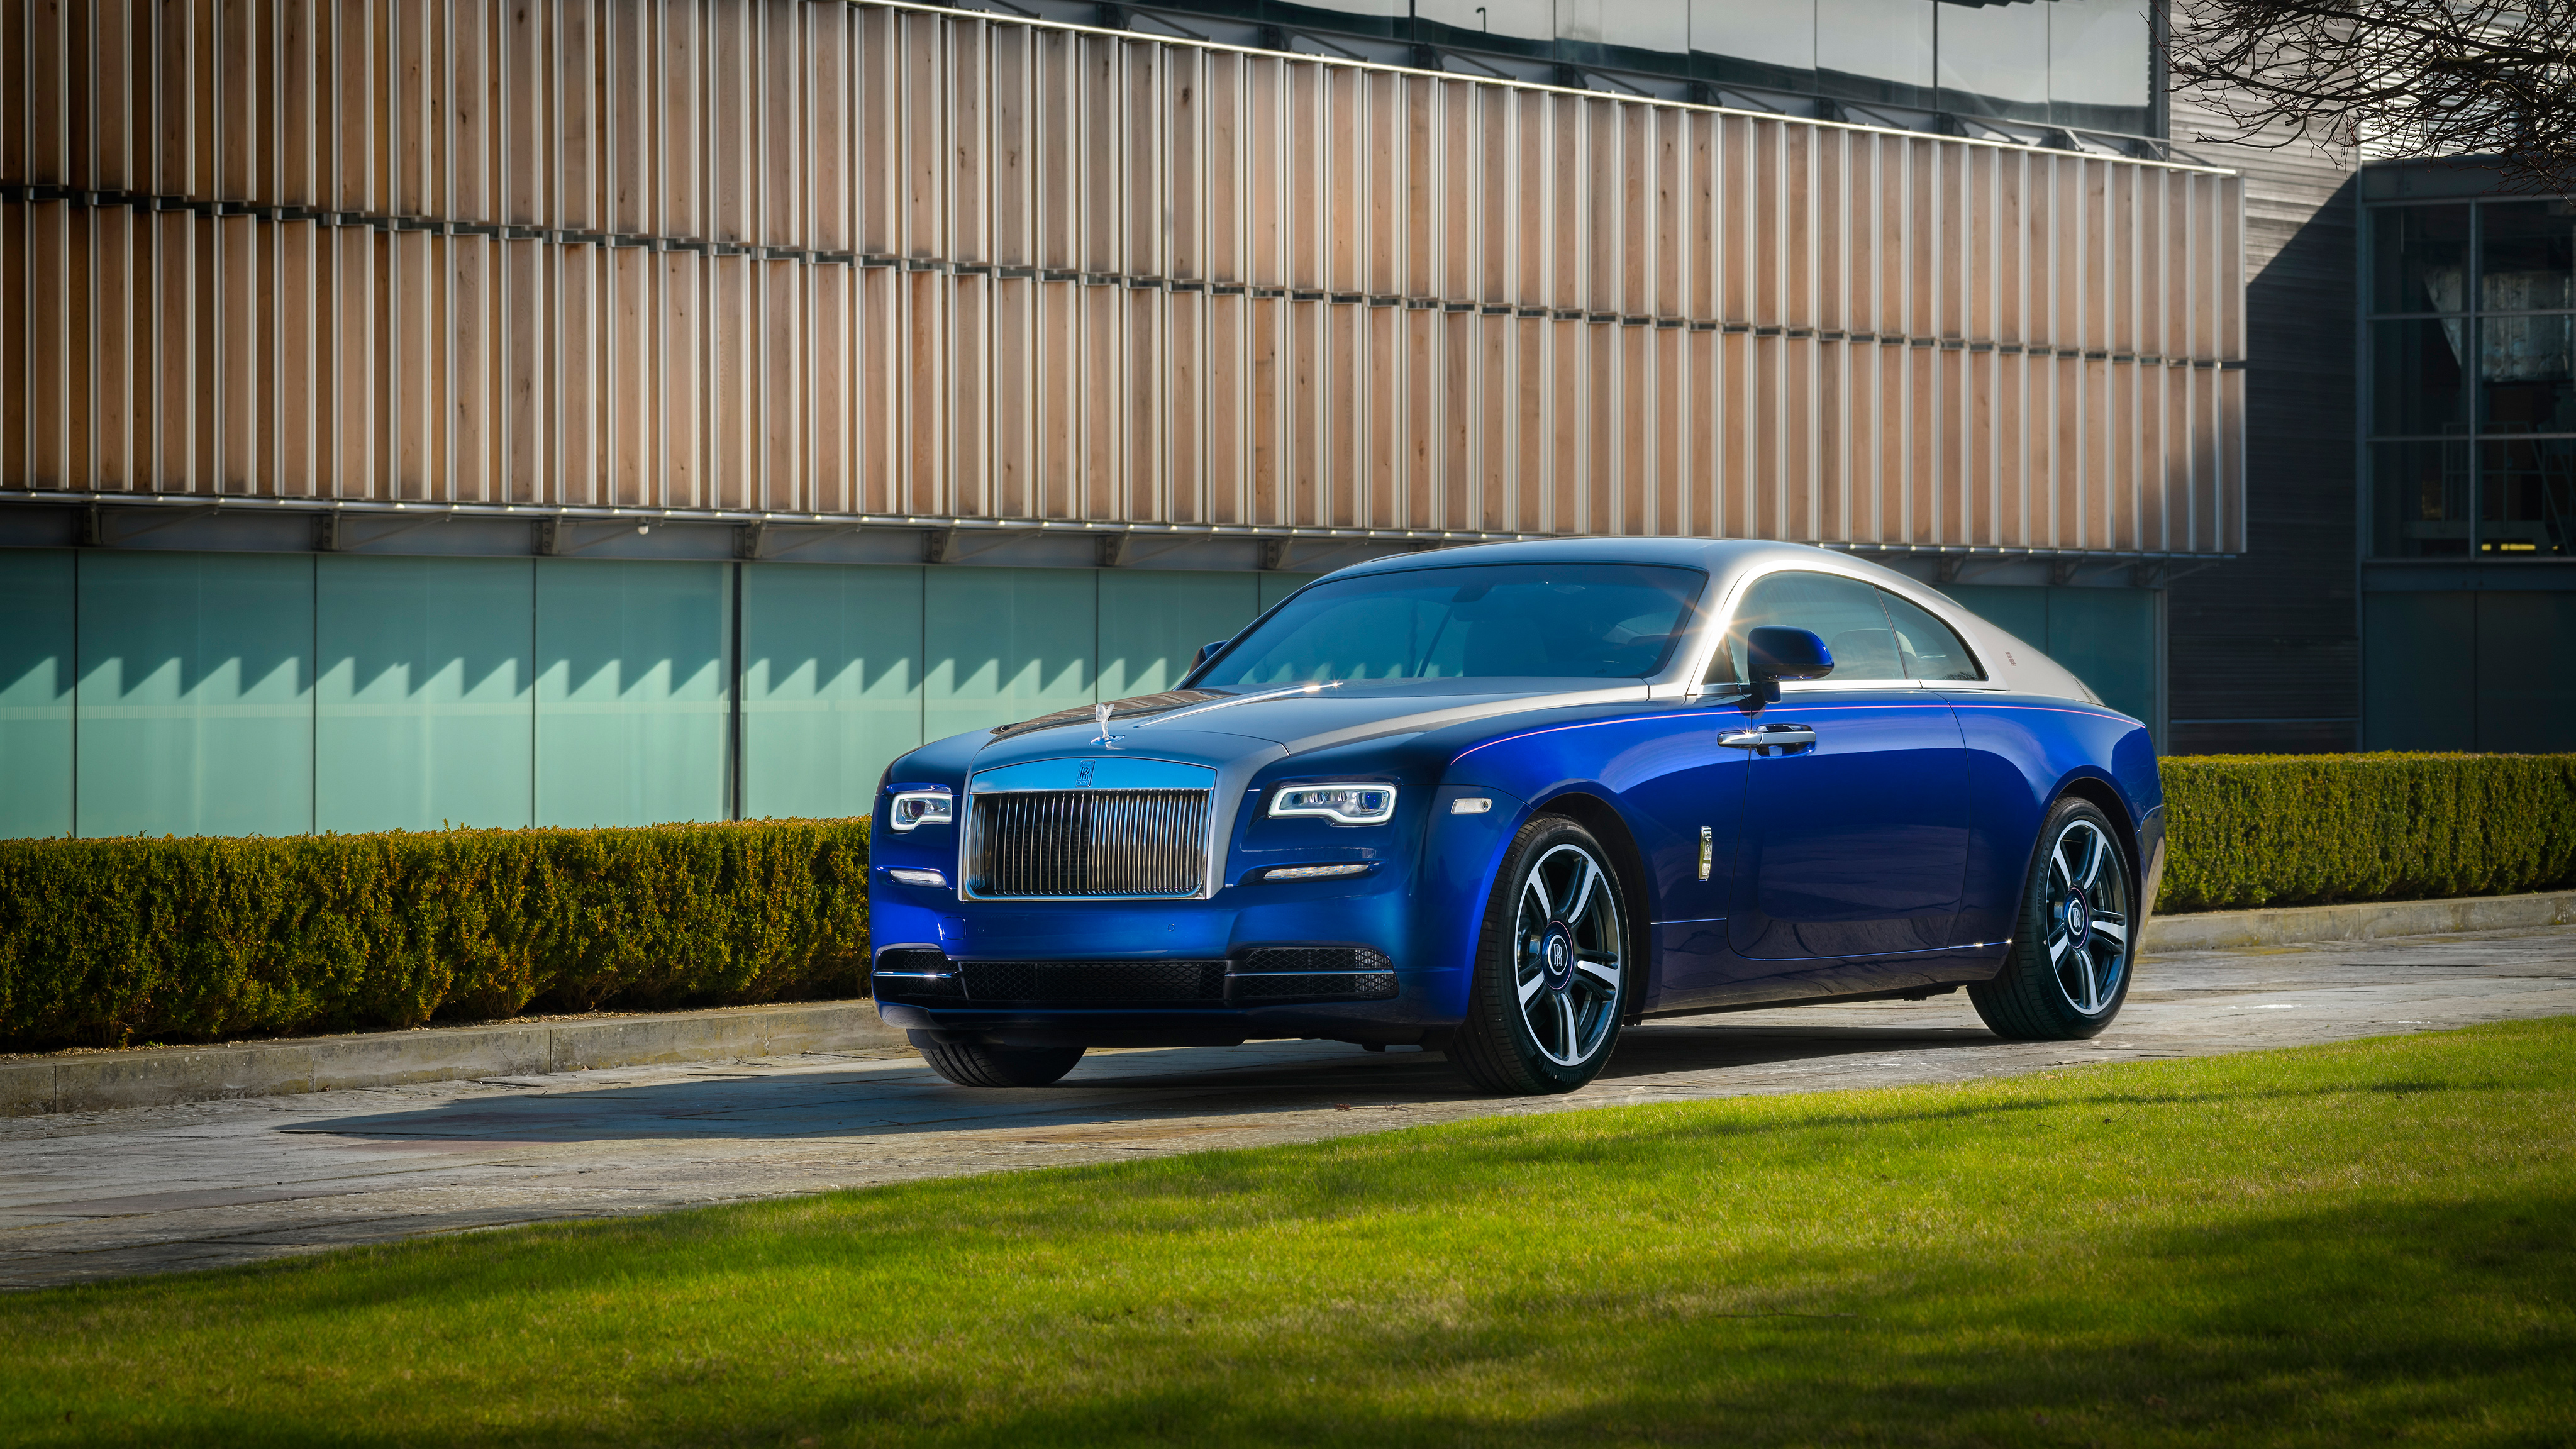 Rolls-Royce Wraith exterior restyling